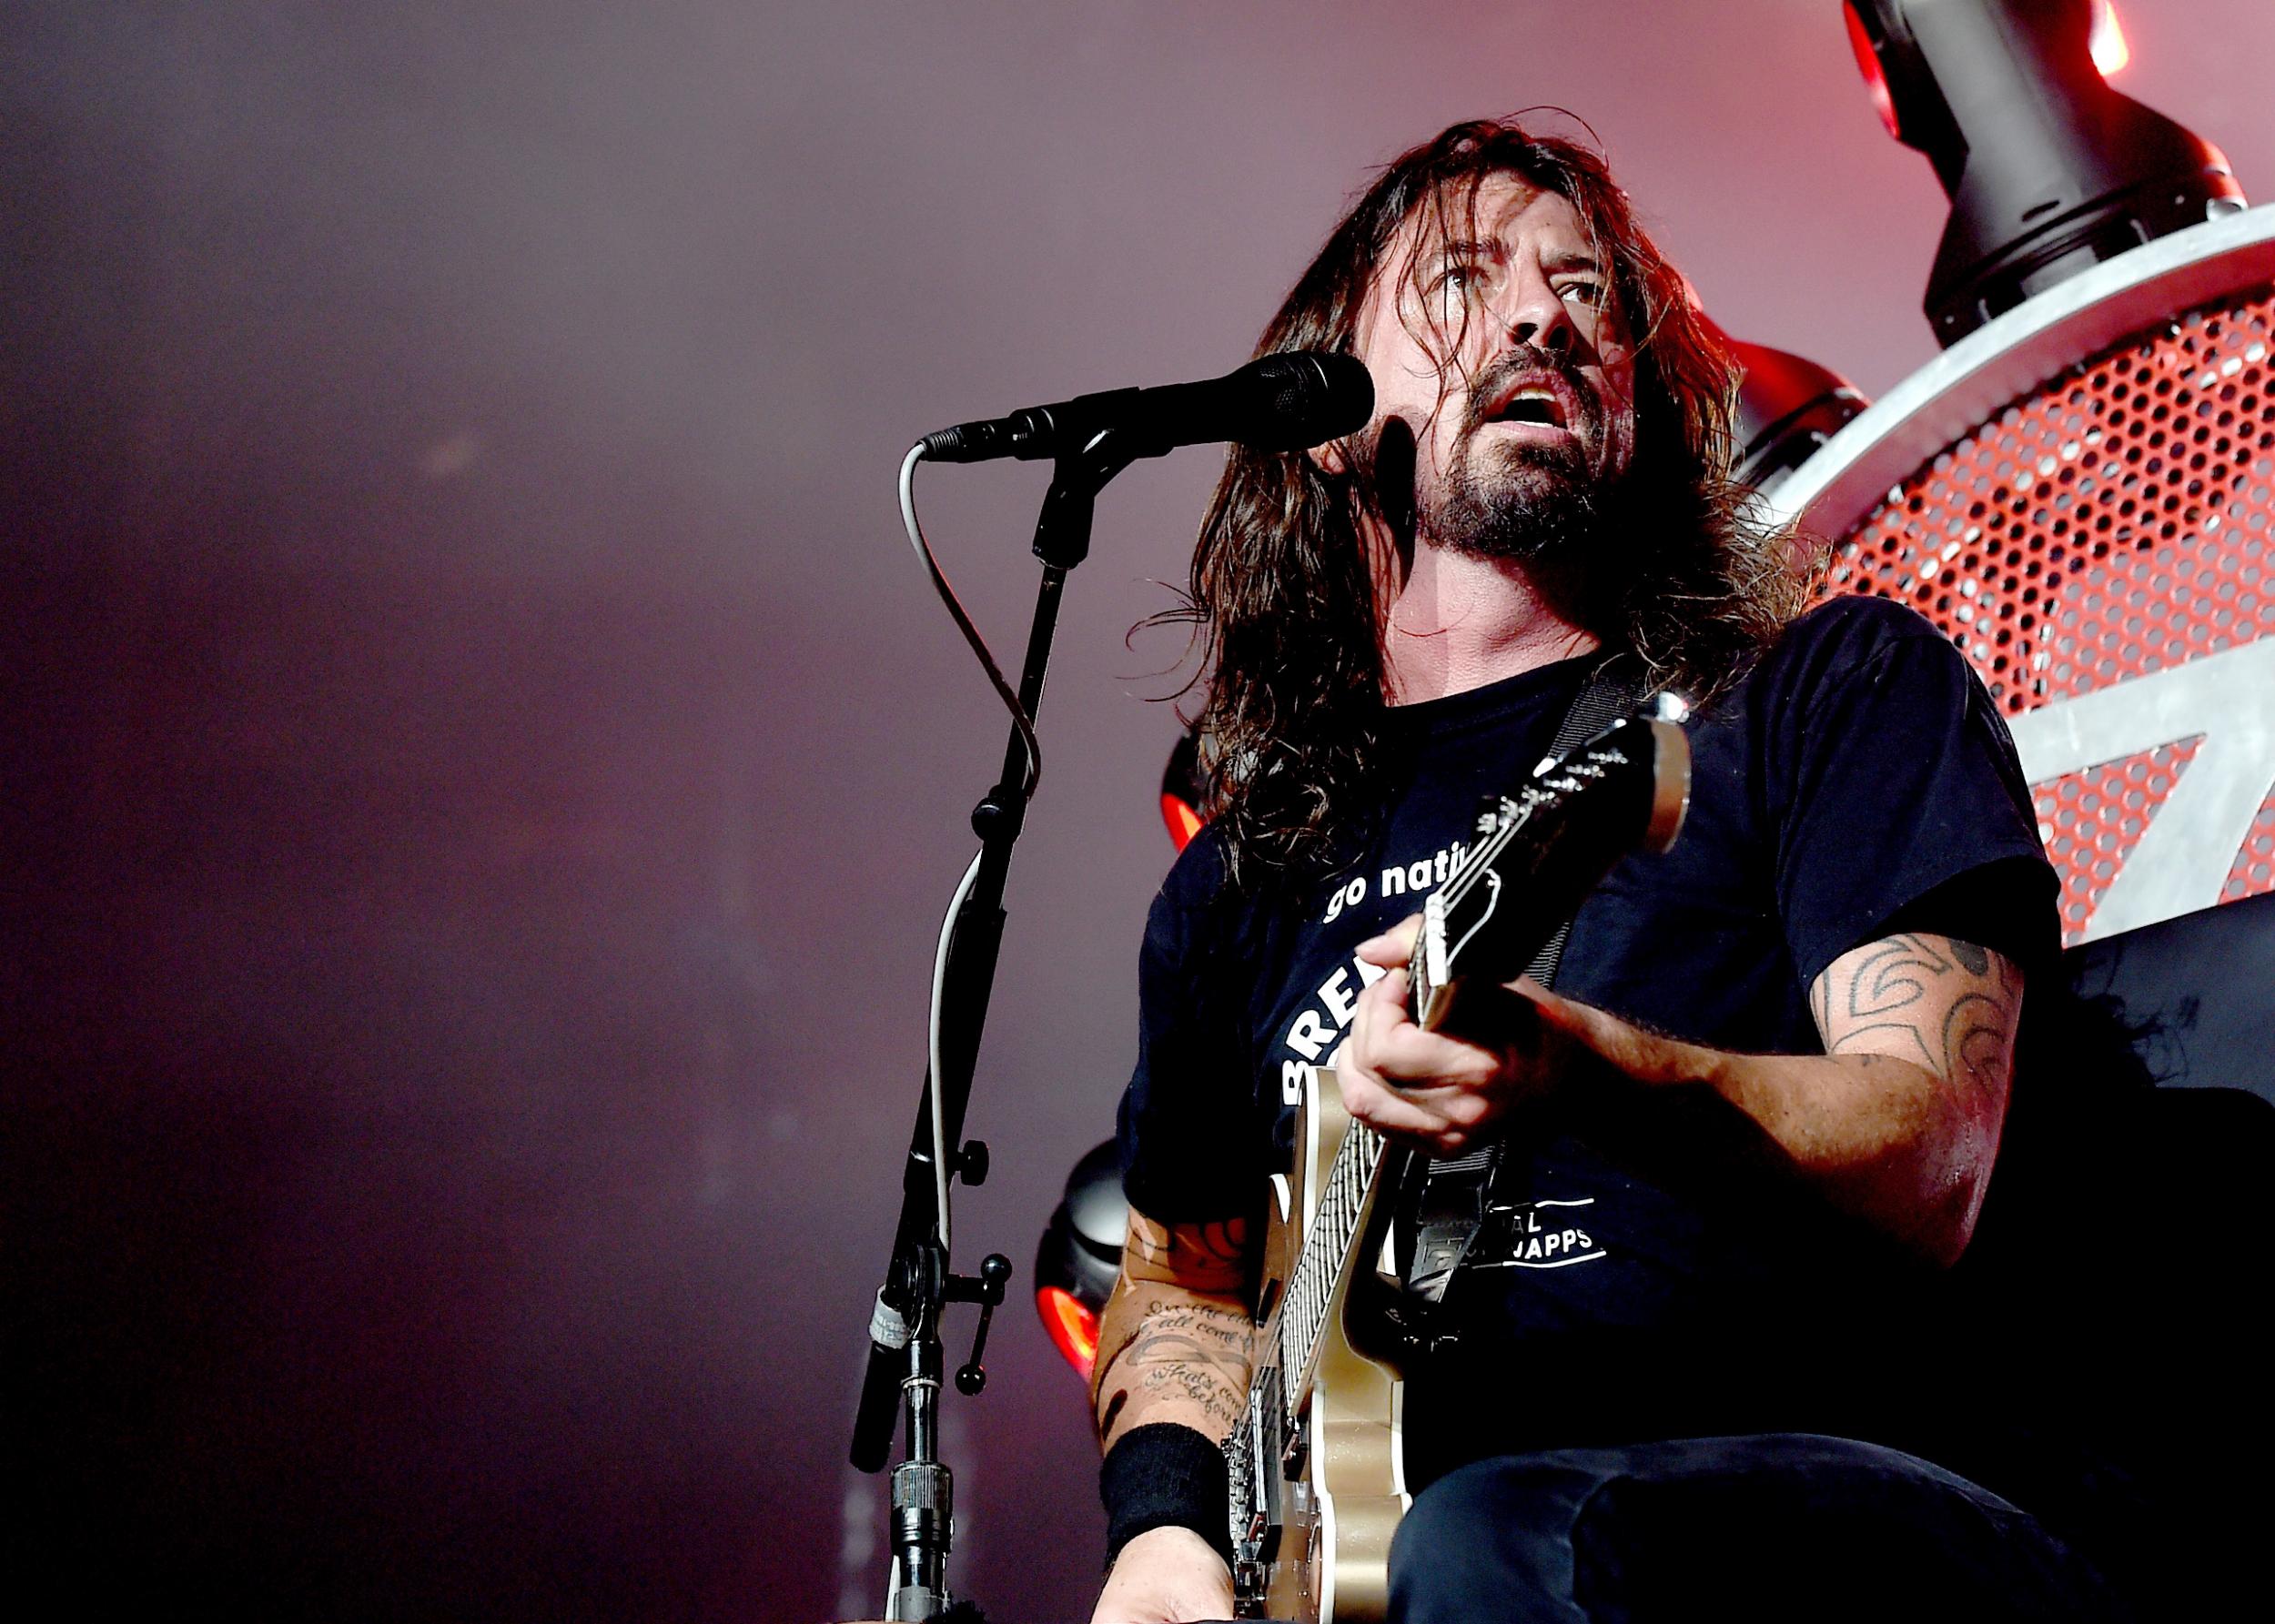 Dave Grohl once wrote a song collaboration for David Bowie.